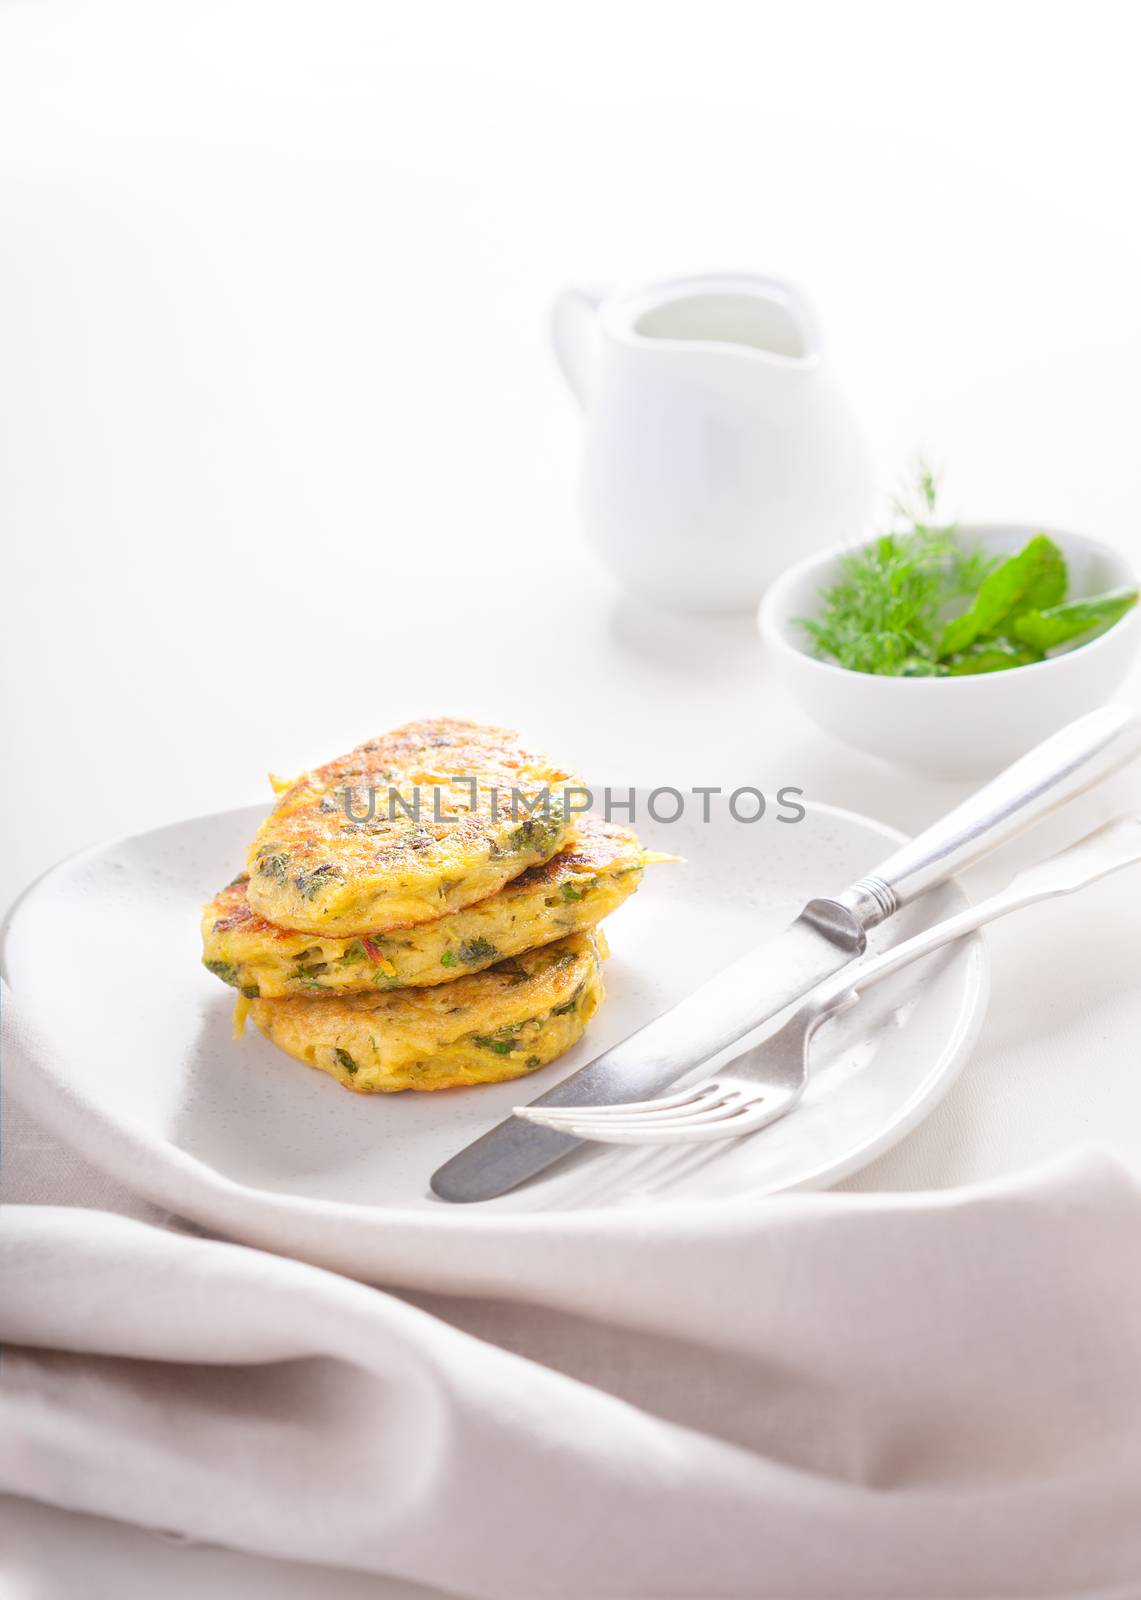 Healthy vegetarian zucchini fritters by supercat67